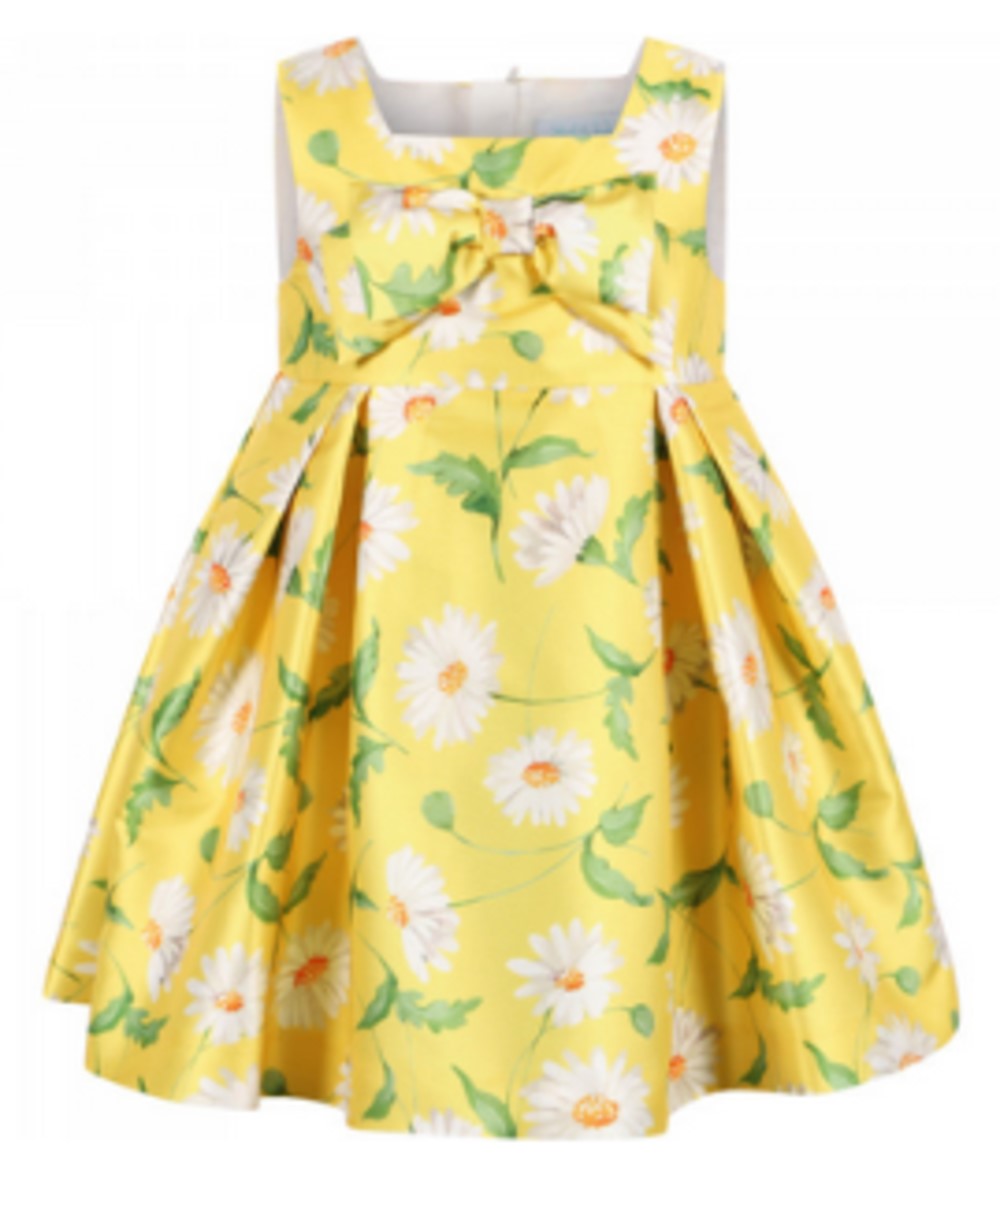 ABEL & LULA 5014 BABY GIRLS DAISY PRINT SPECIAL OCCASION DRESS